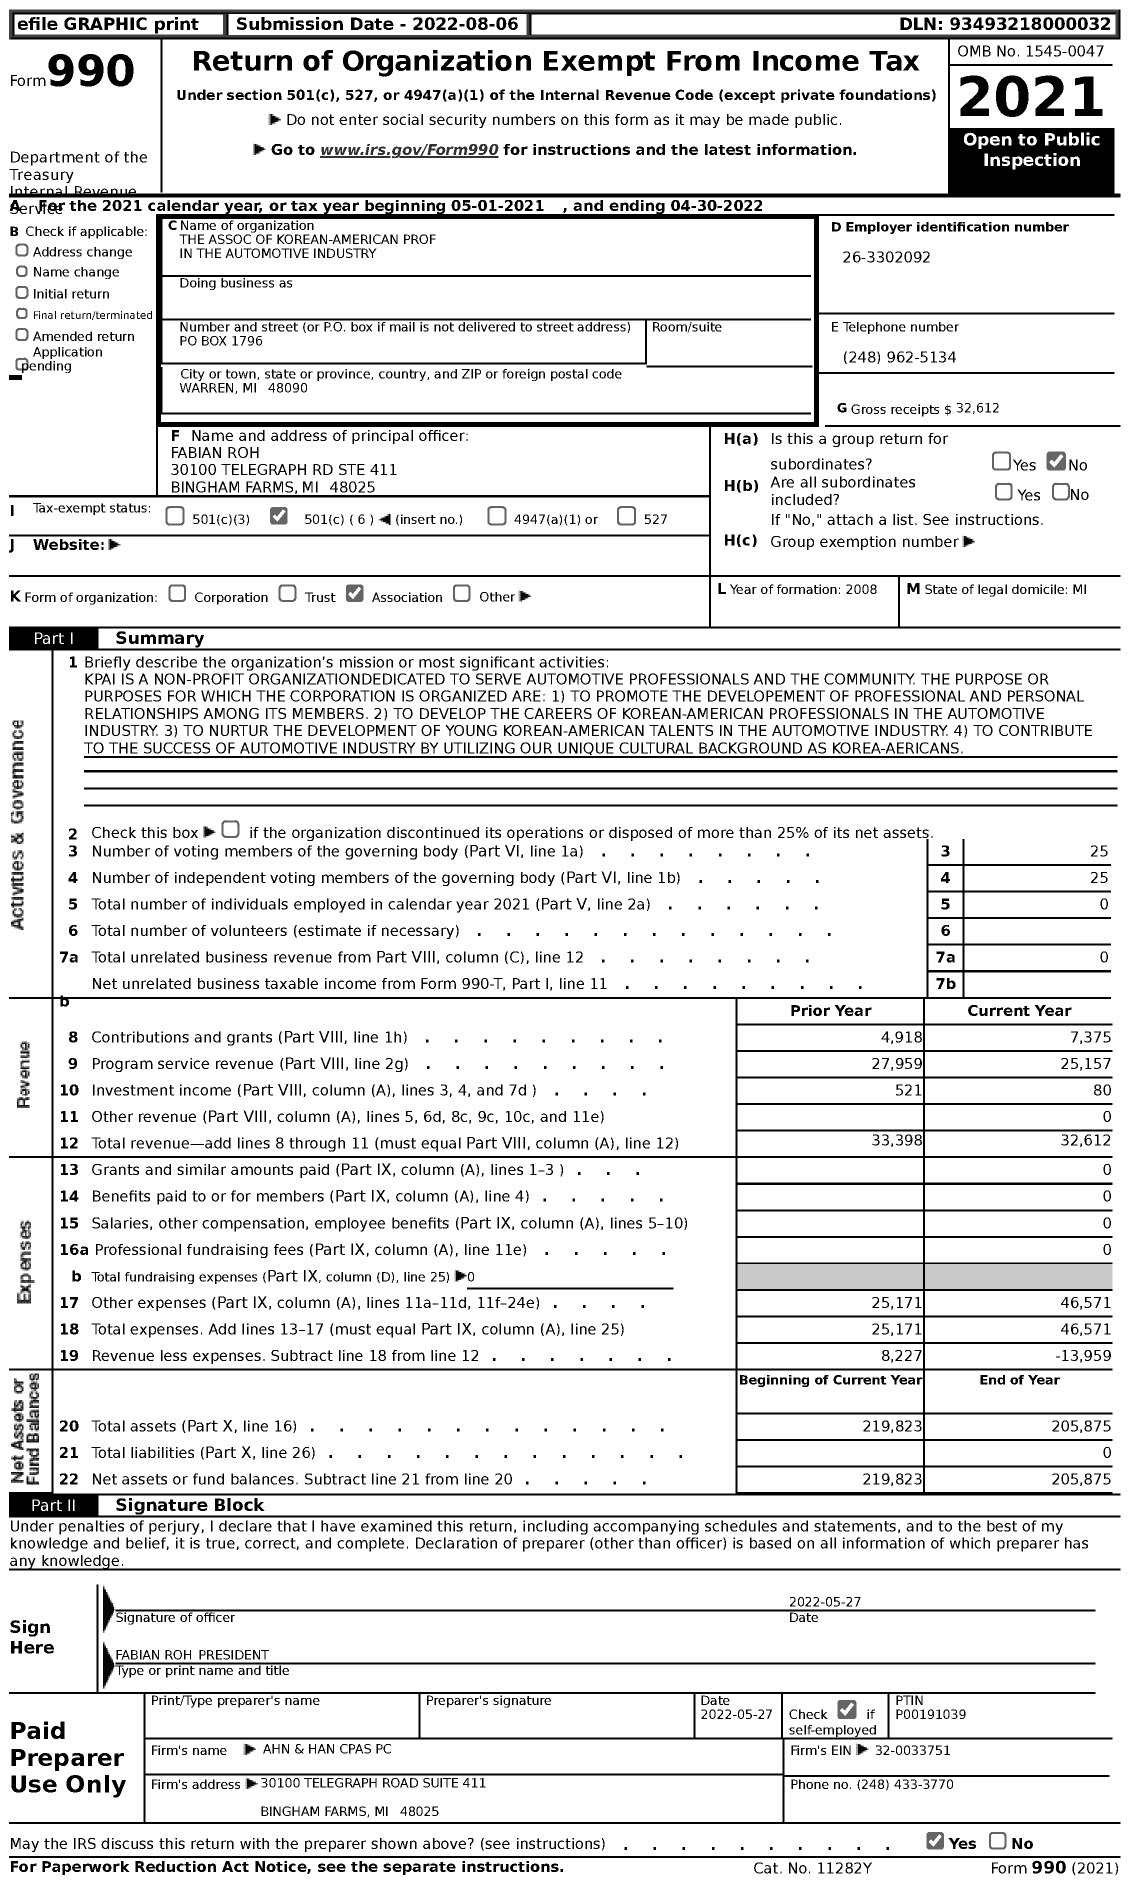 Image of first page of 2021 Form 990 for The Association of Korean-American Prof in the Automotive Industry